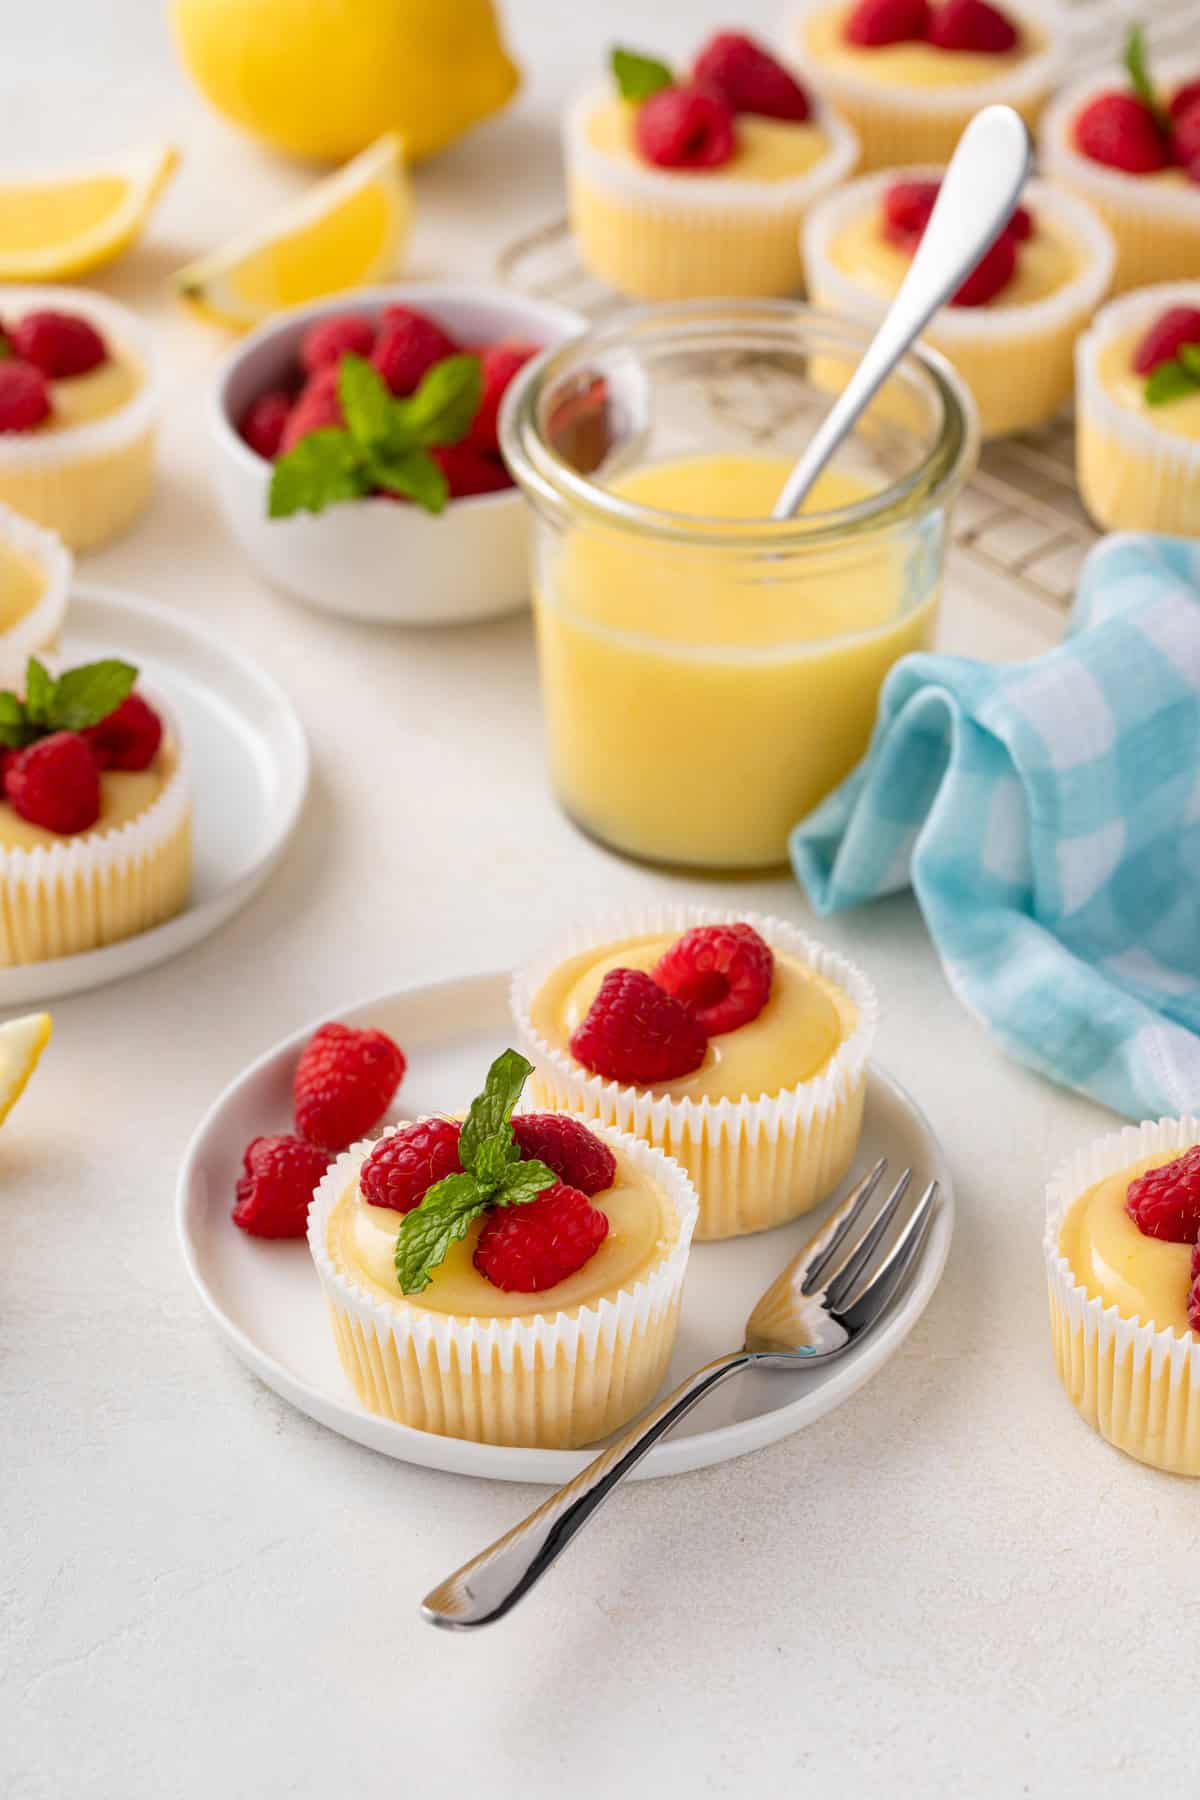 Two mini lemon cheesecakes on a white plate next to a jar of lemon curd.